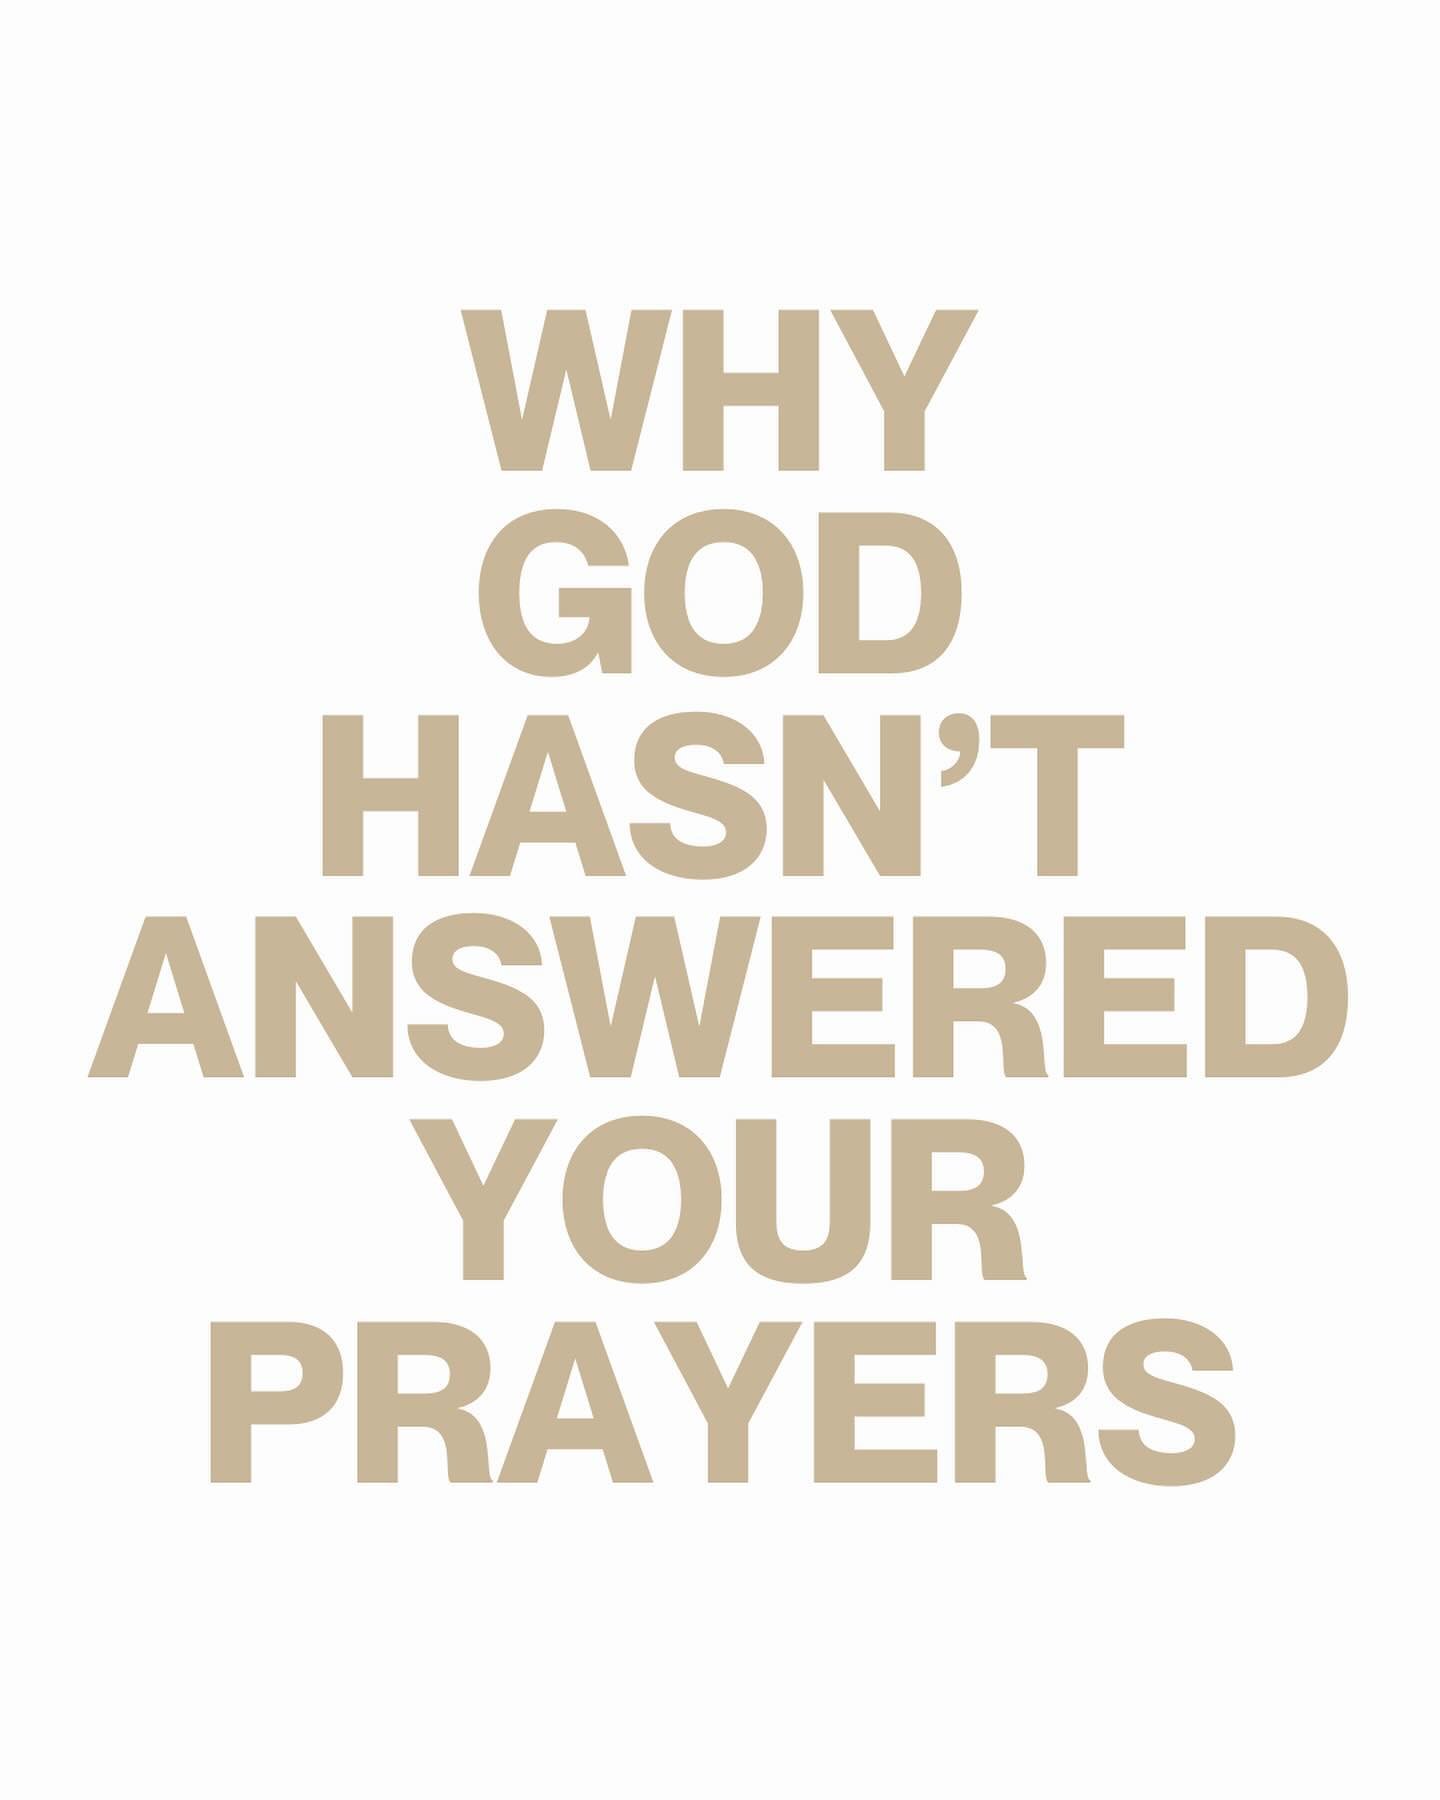 WHY GOD HASN&rsquo;T ANSWERED YOUR PRAYERS⁣
⁣
you&rsquo;re praying the wrong prayers⁣
⁣
- &ldquo;You ask and do not receive, because you ask amiss, that you may spend it on your pleasures.&rdquo; (JAMES 4:3)⁣
⁣
- Don&rsquo;t forget to sit and listen 